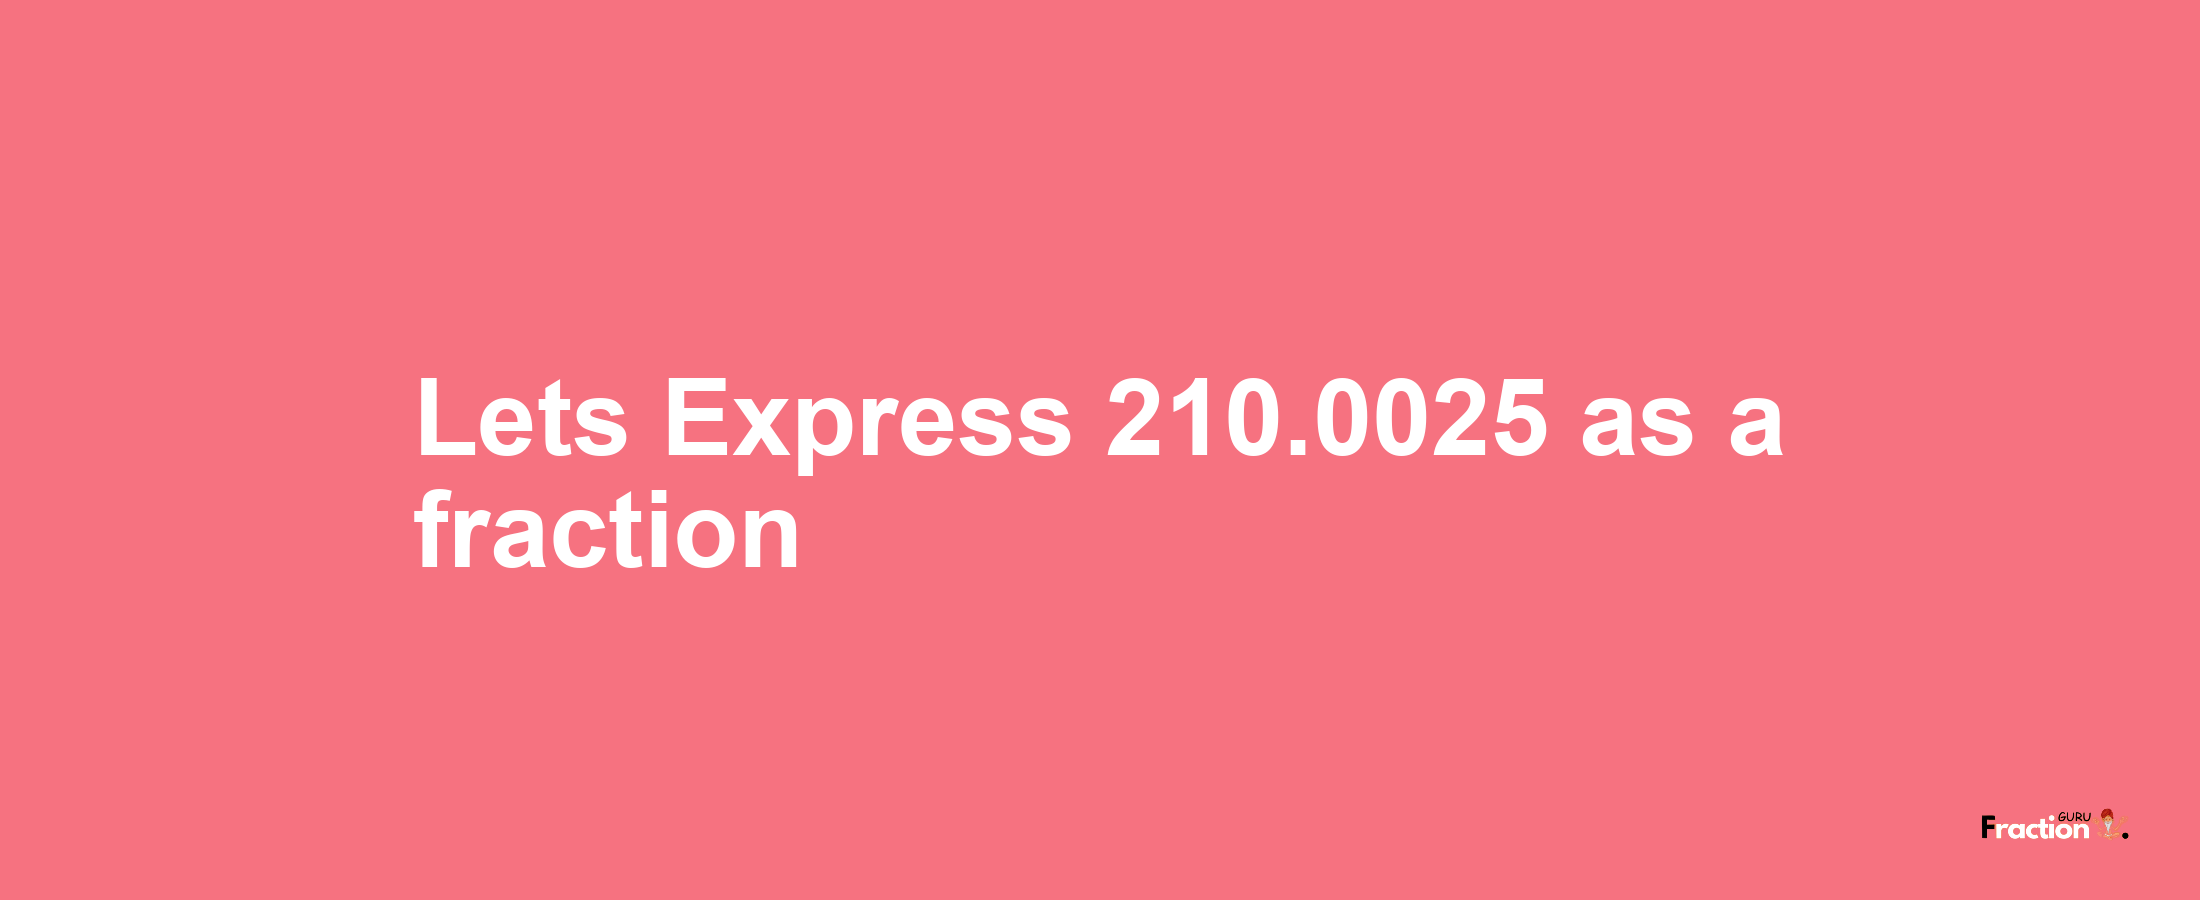 Lets Express 210.0025 as afraction